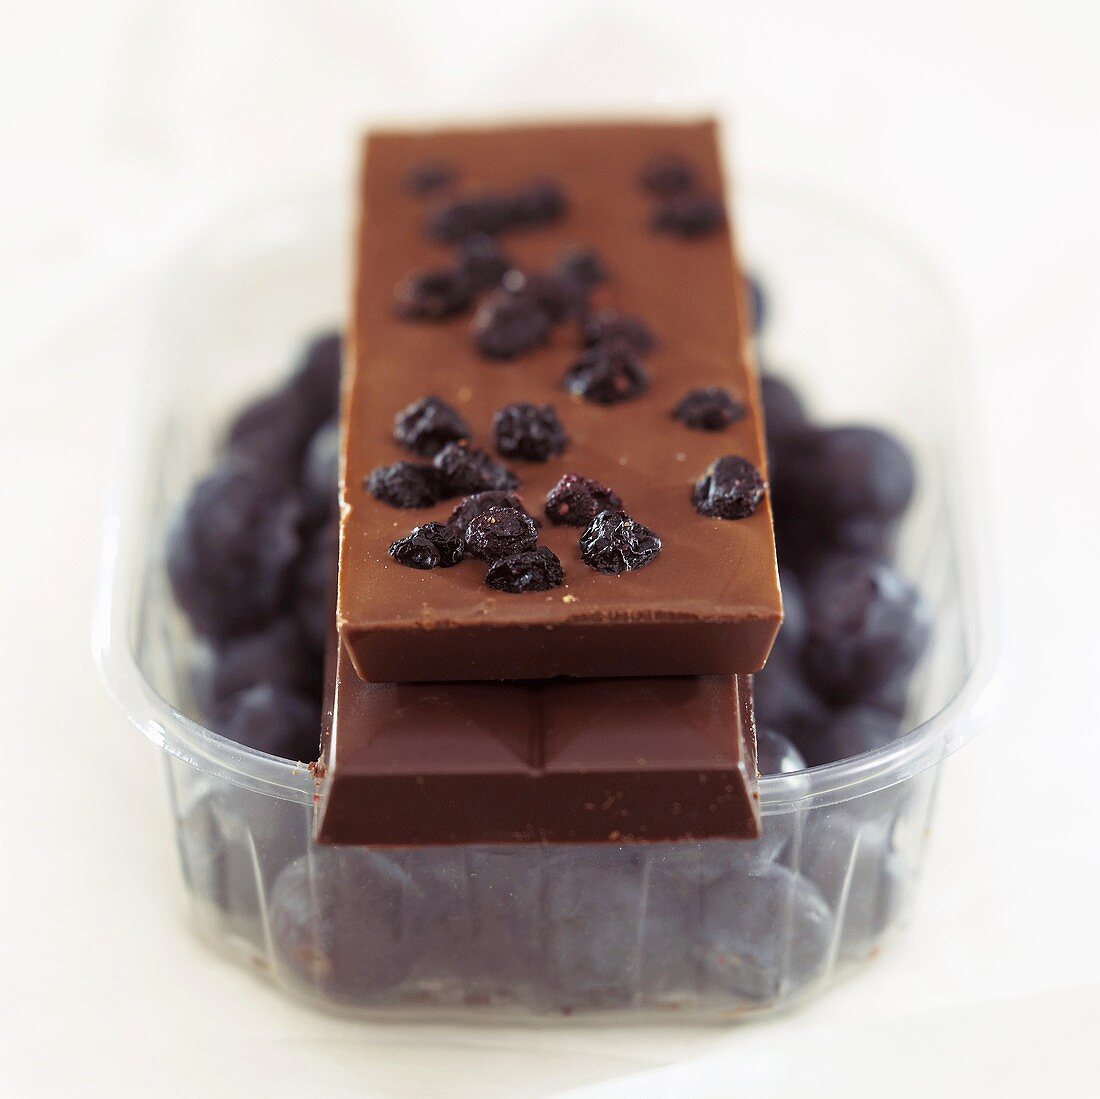 Chocolate with blueberries